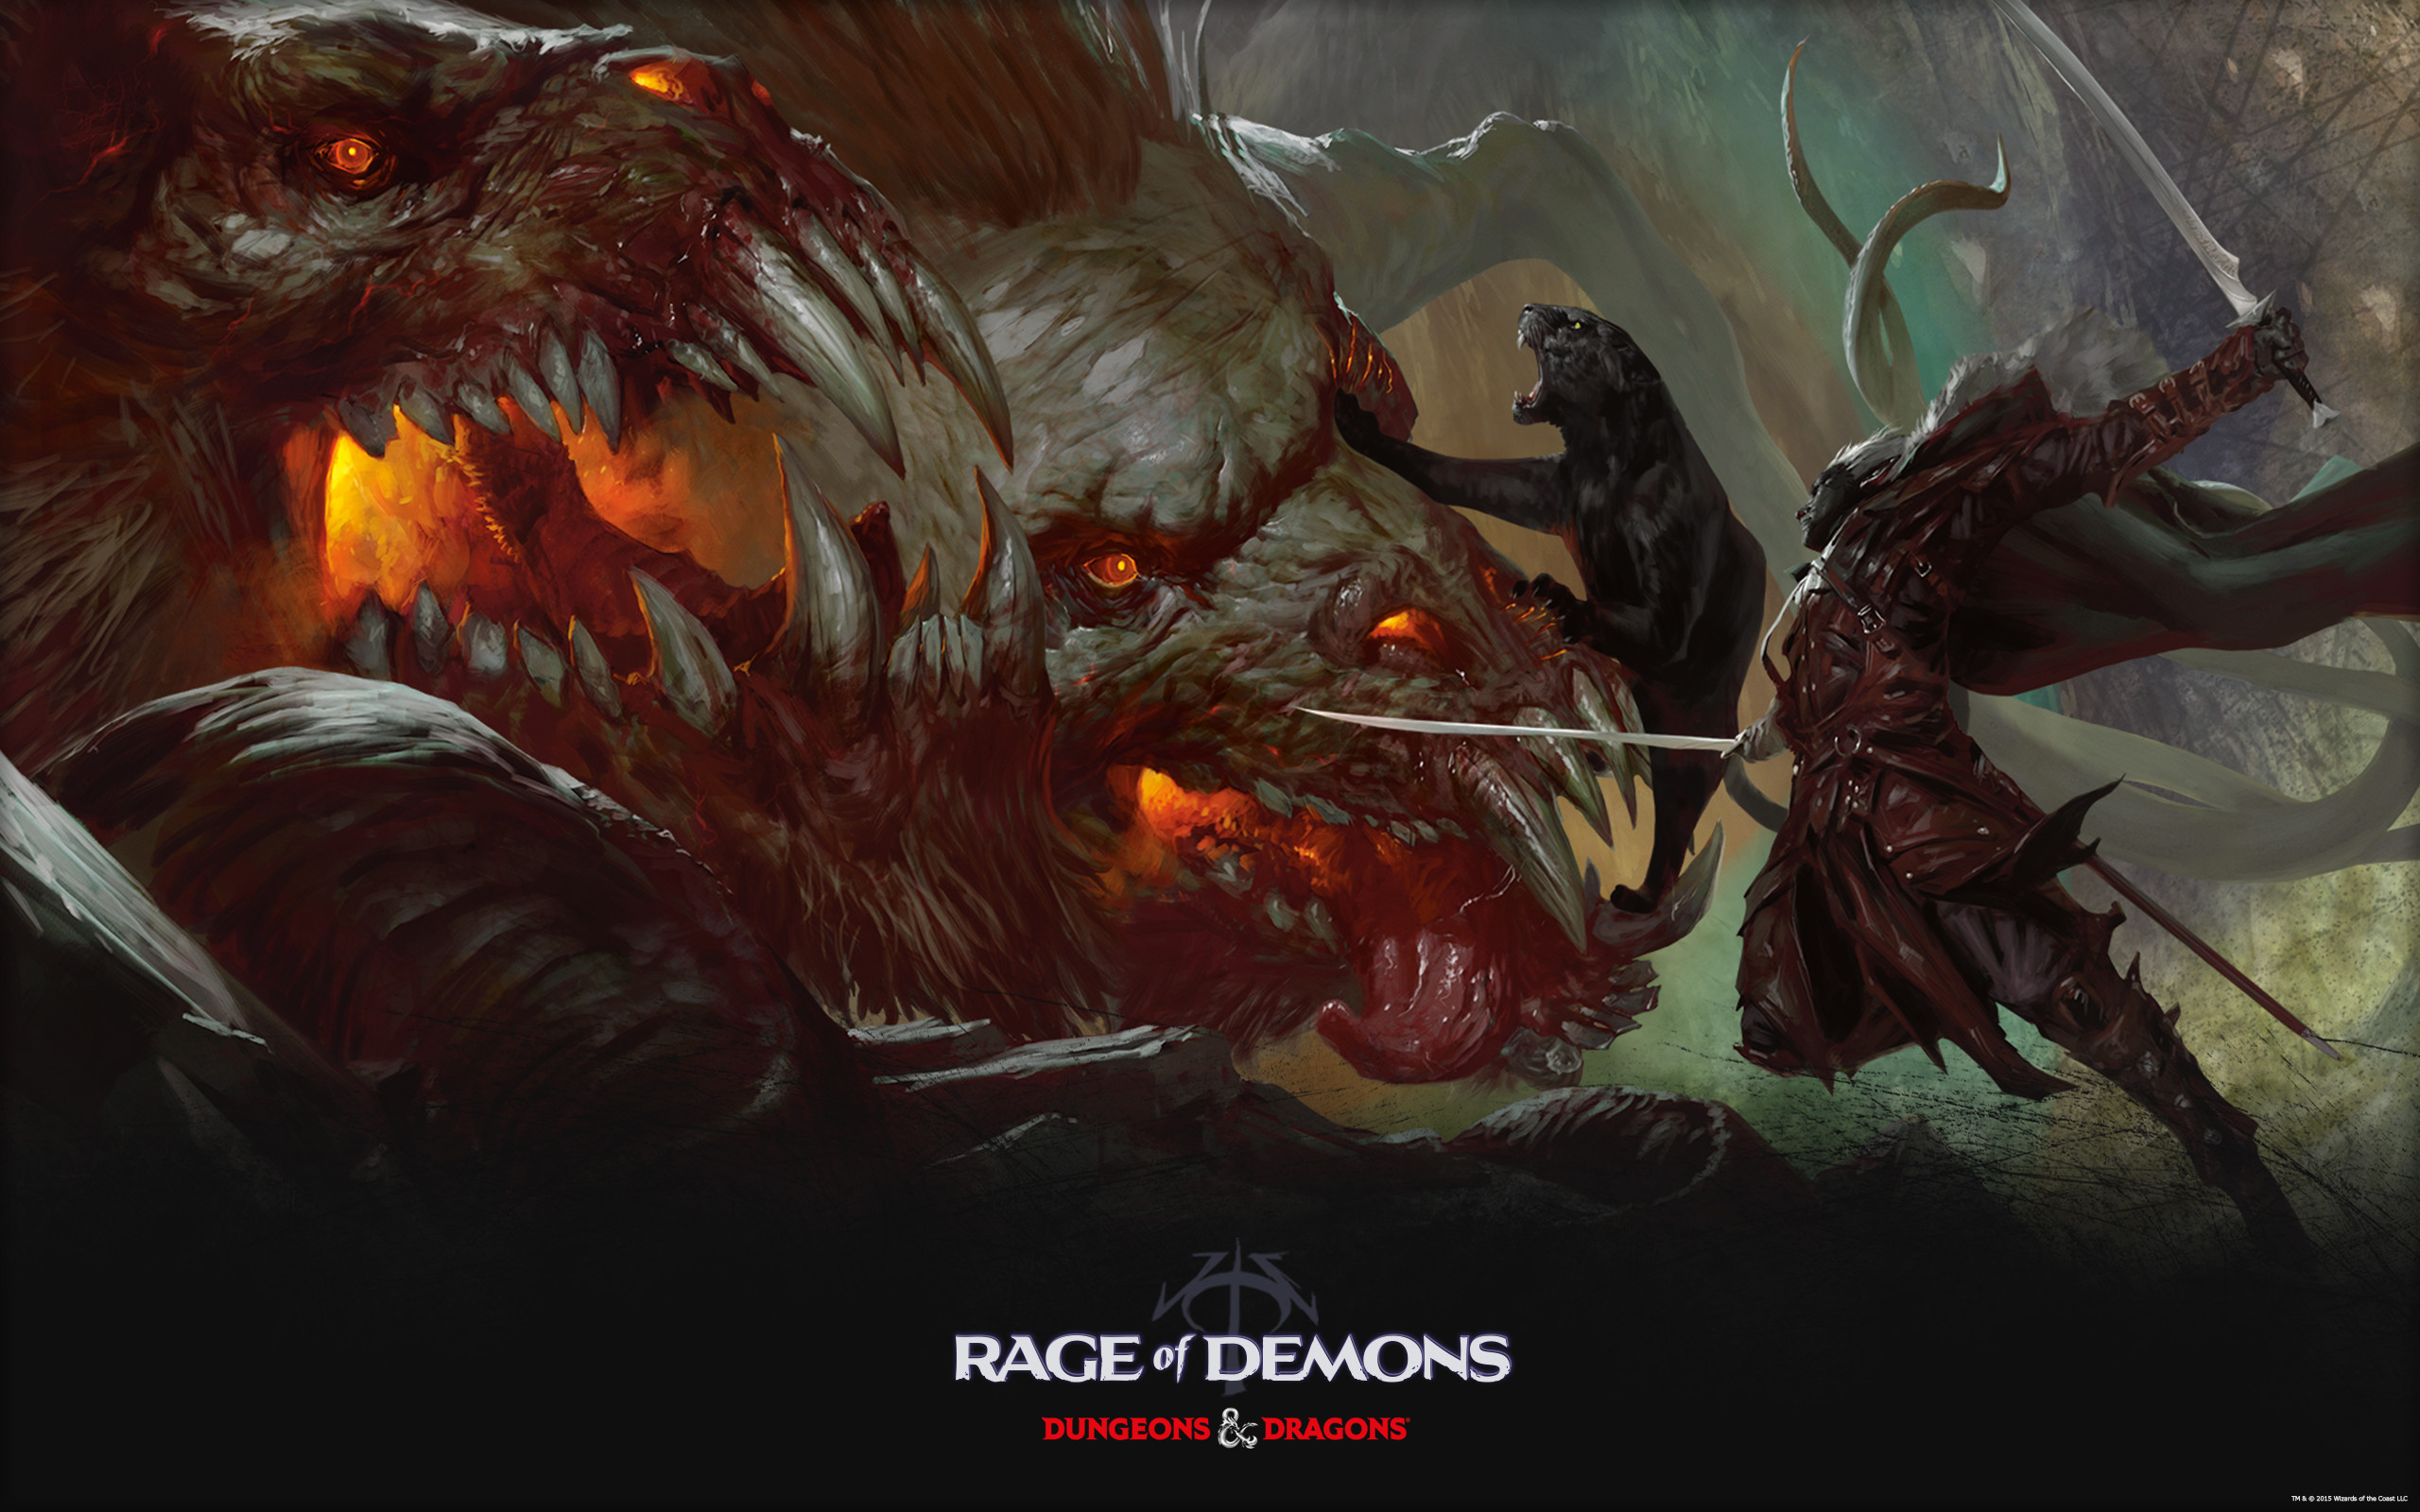 2560x1600 Rage of Demons, a new Dungeons & Dragons Storyline, Coming This Fall